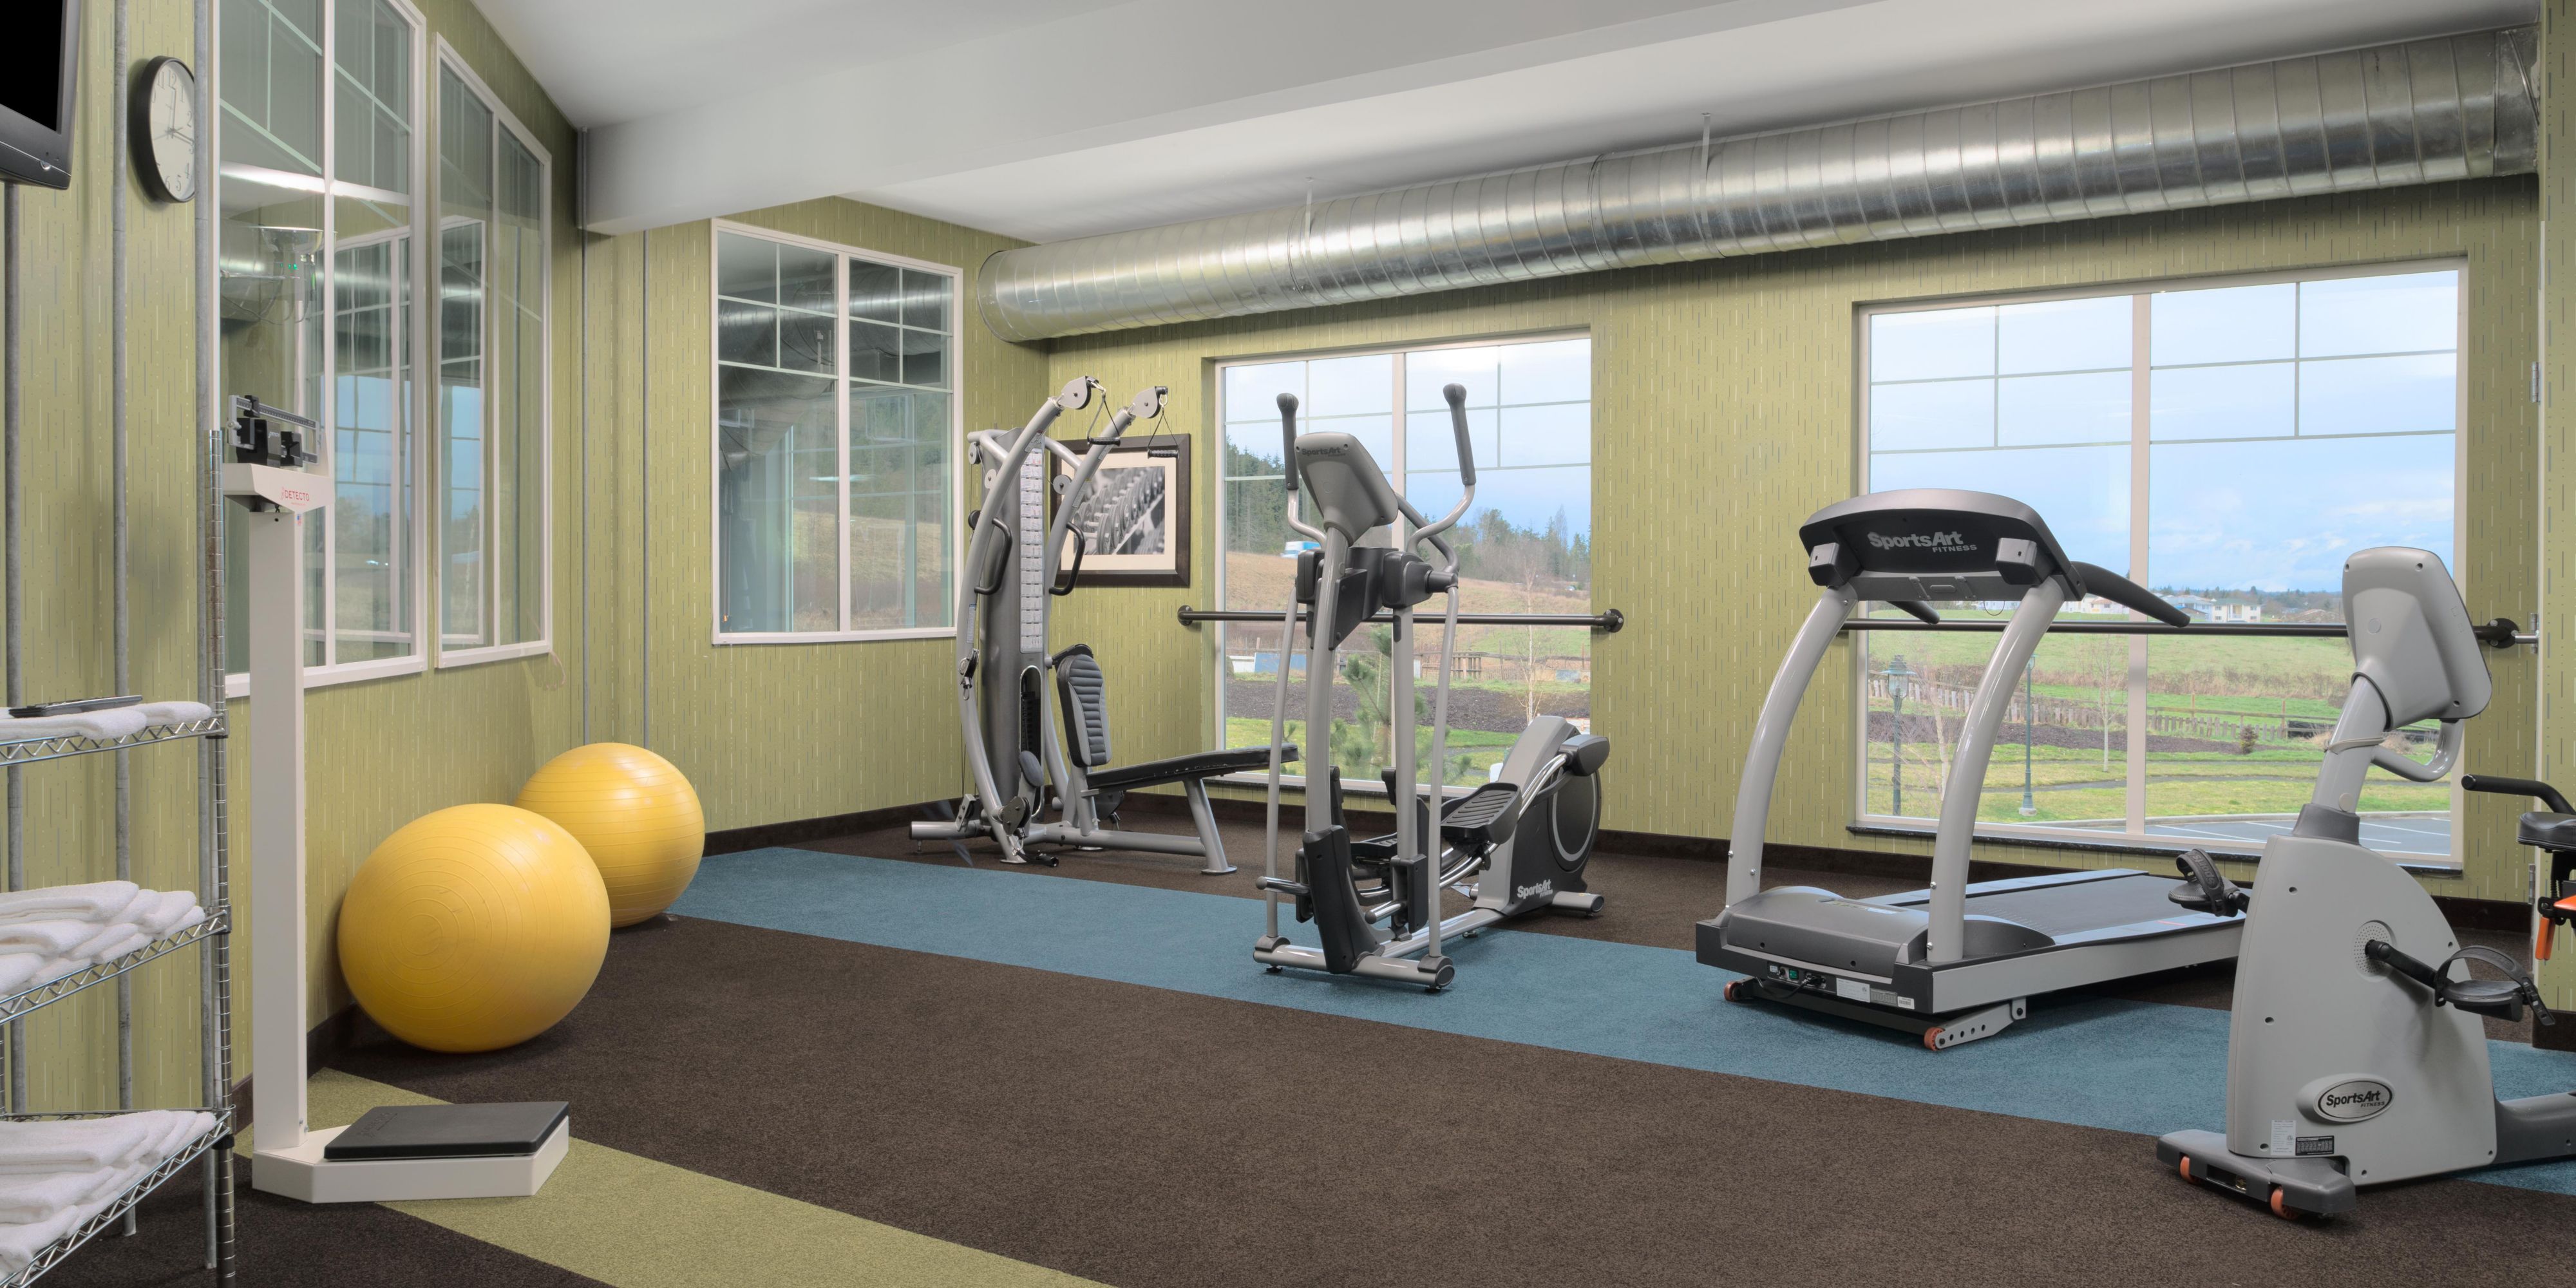 Come check out our newly renovated state of the art fitness center! We offer 2 treadmills, a bike, elliptical, resistance bands, kettlebell and free weights.